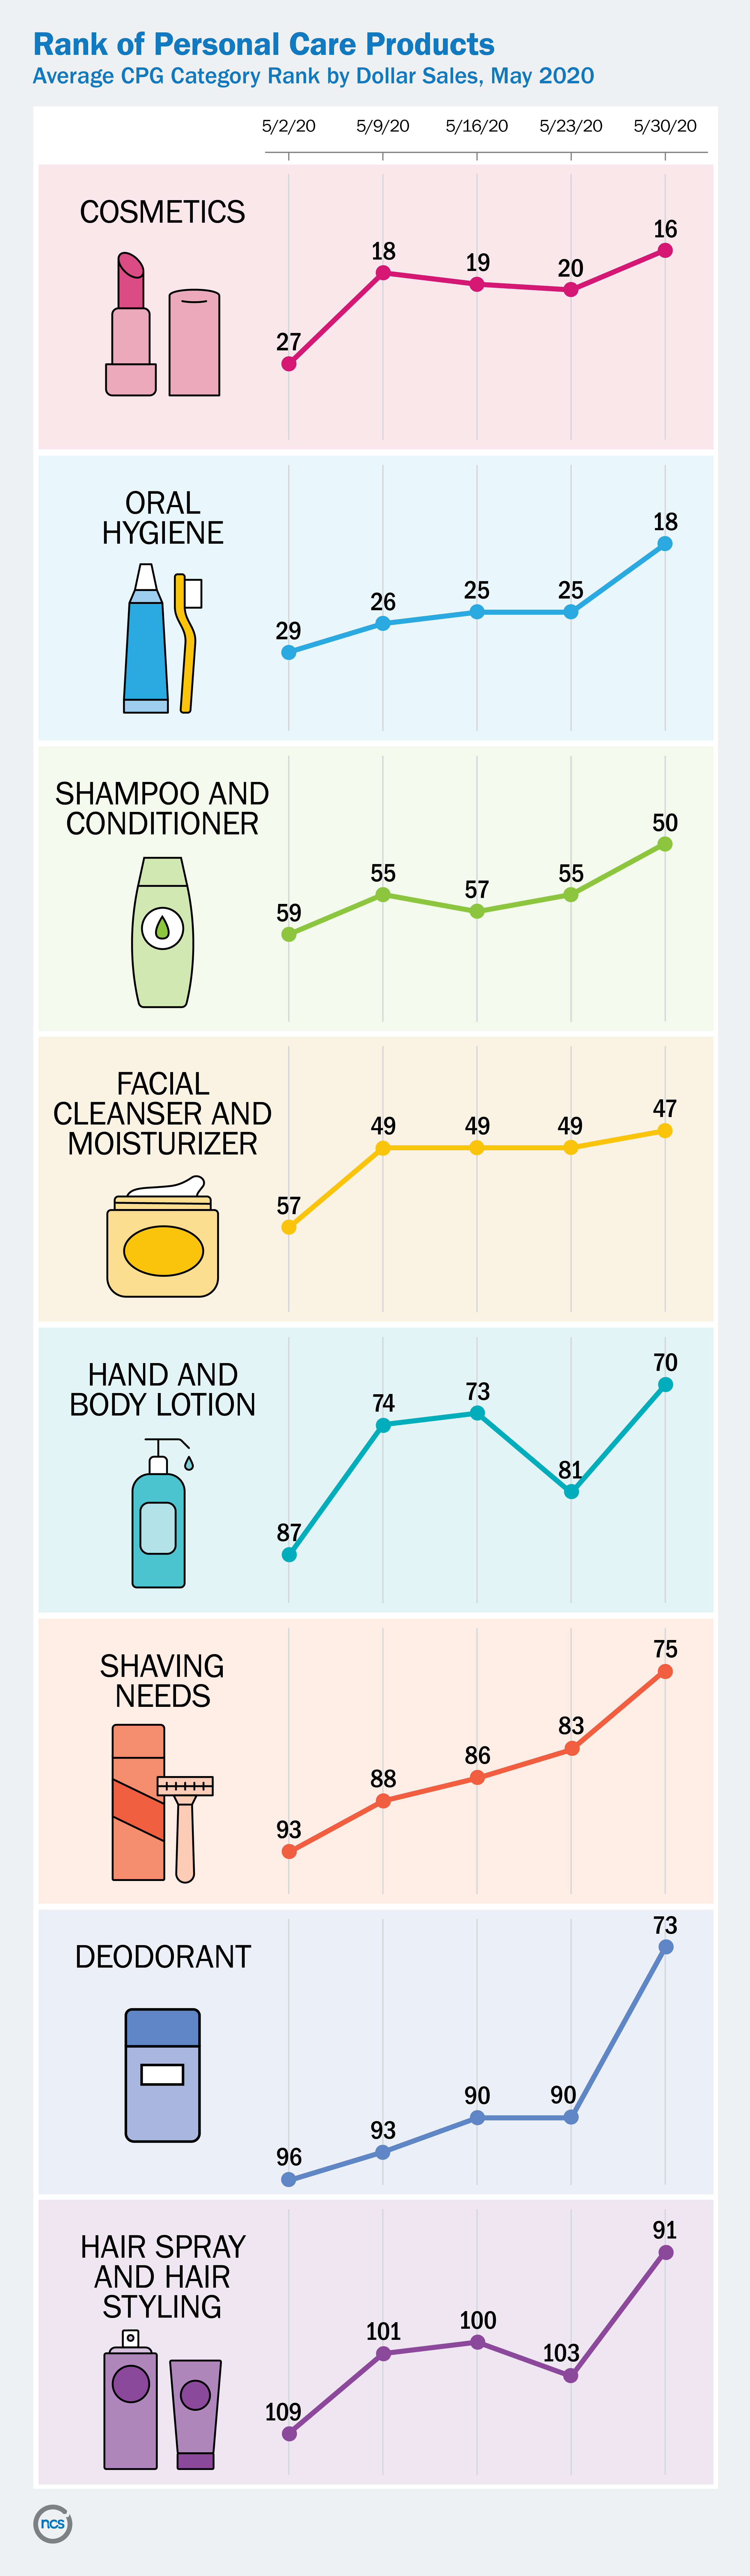 Beauty and Personal Care Products Ranked by Dollar Sales May 2020